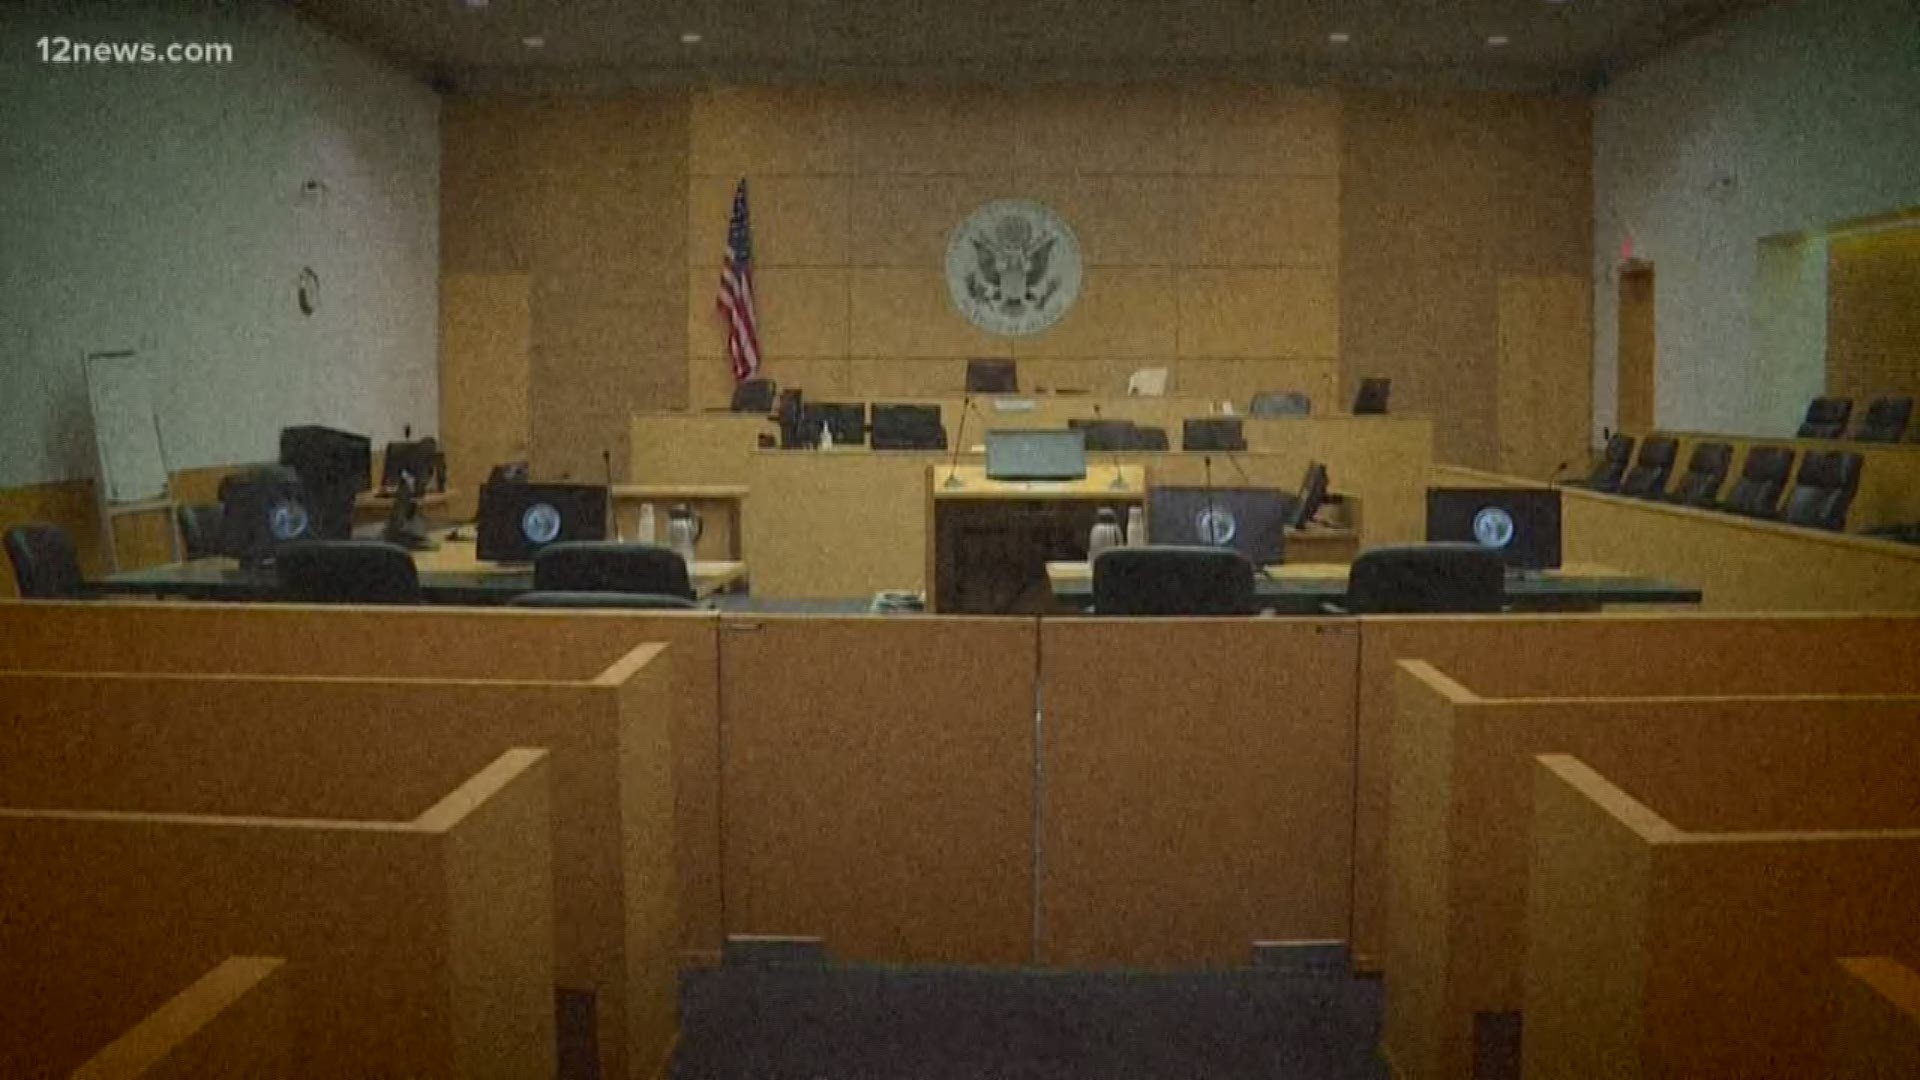 A Valley businesswoman says someone she believed was from the Maricopa County Sheriff's Department called her saying she was in big trouble for skipping jury duty. One detail, however, made it clear that it was a scam.